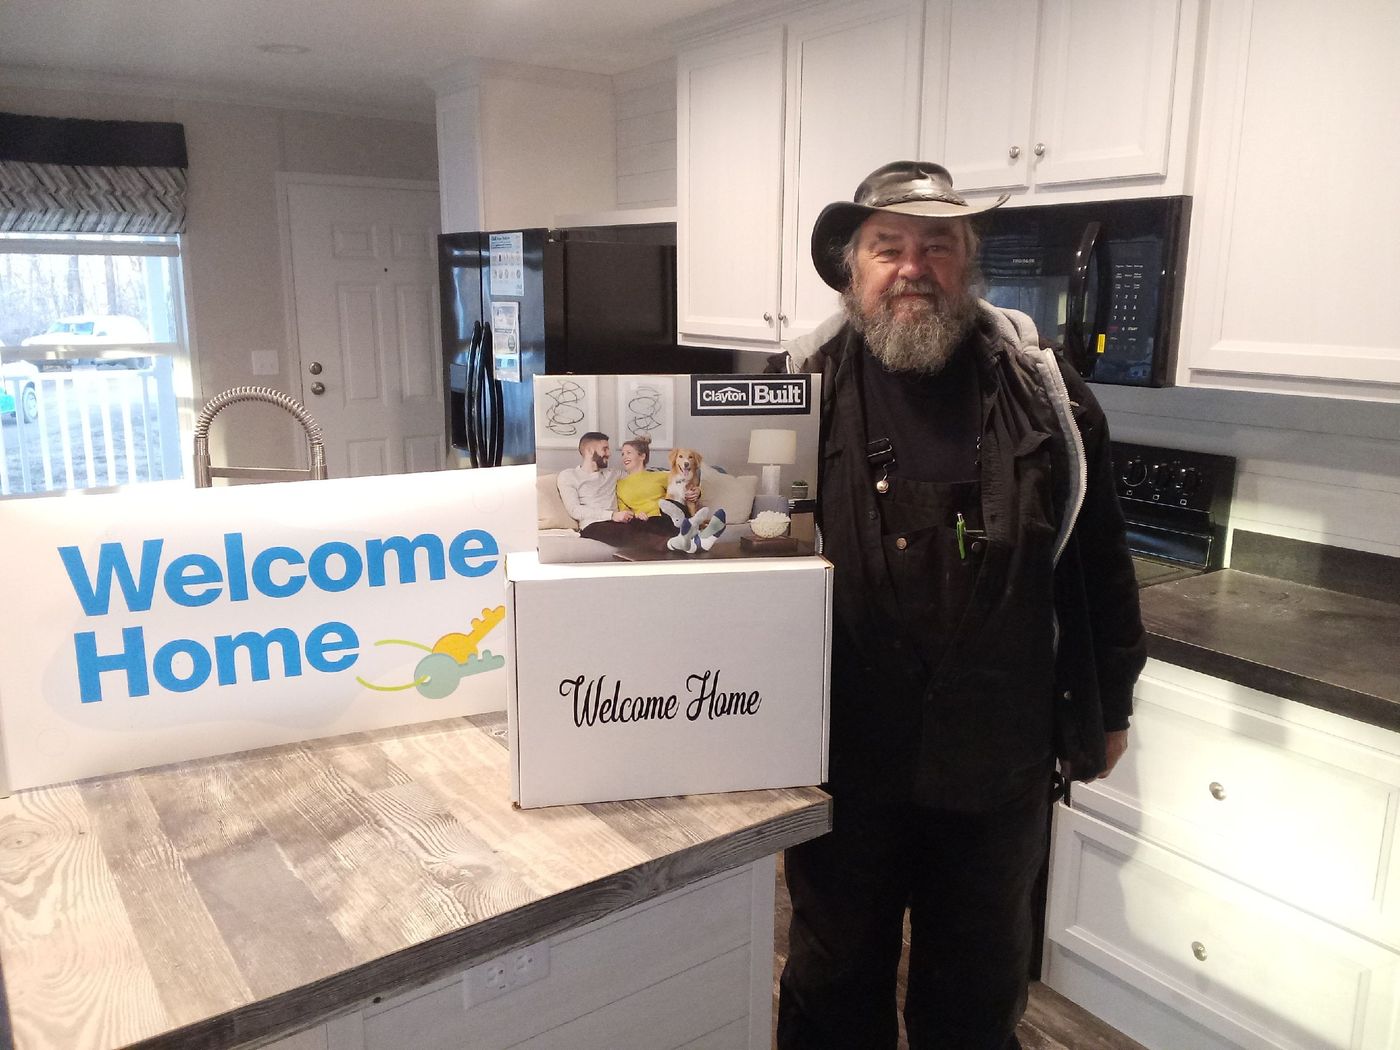 James H. welcome home image